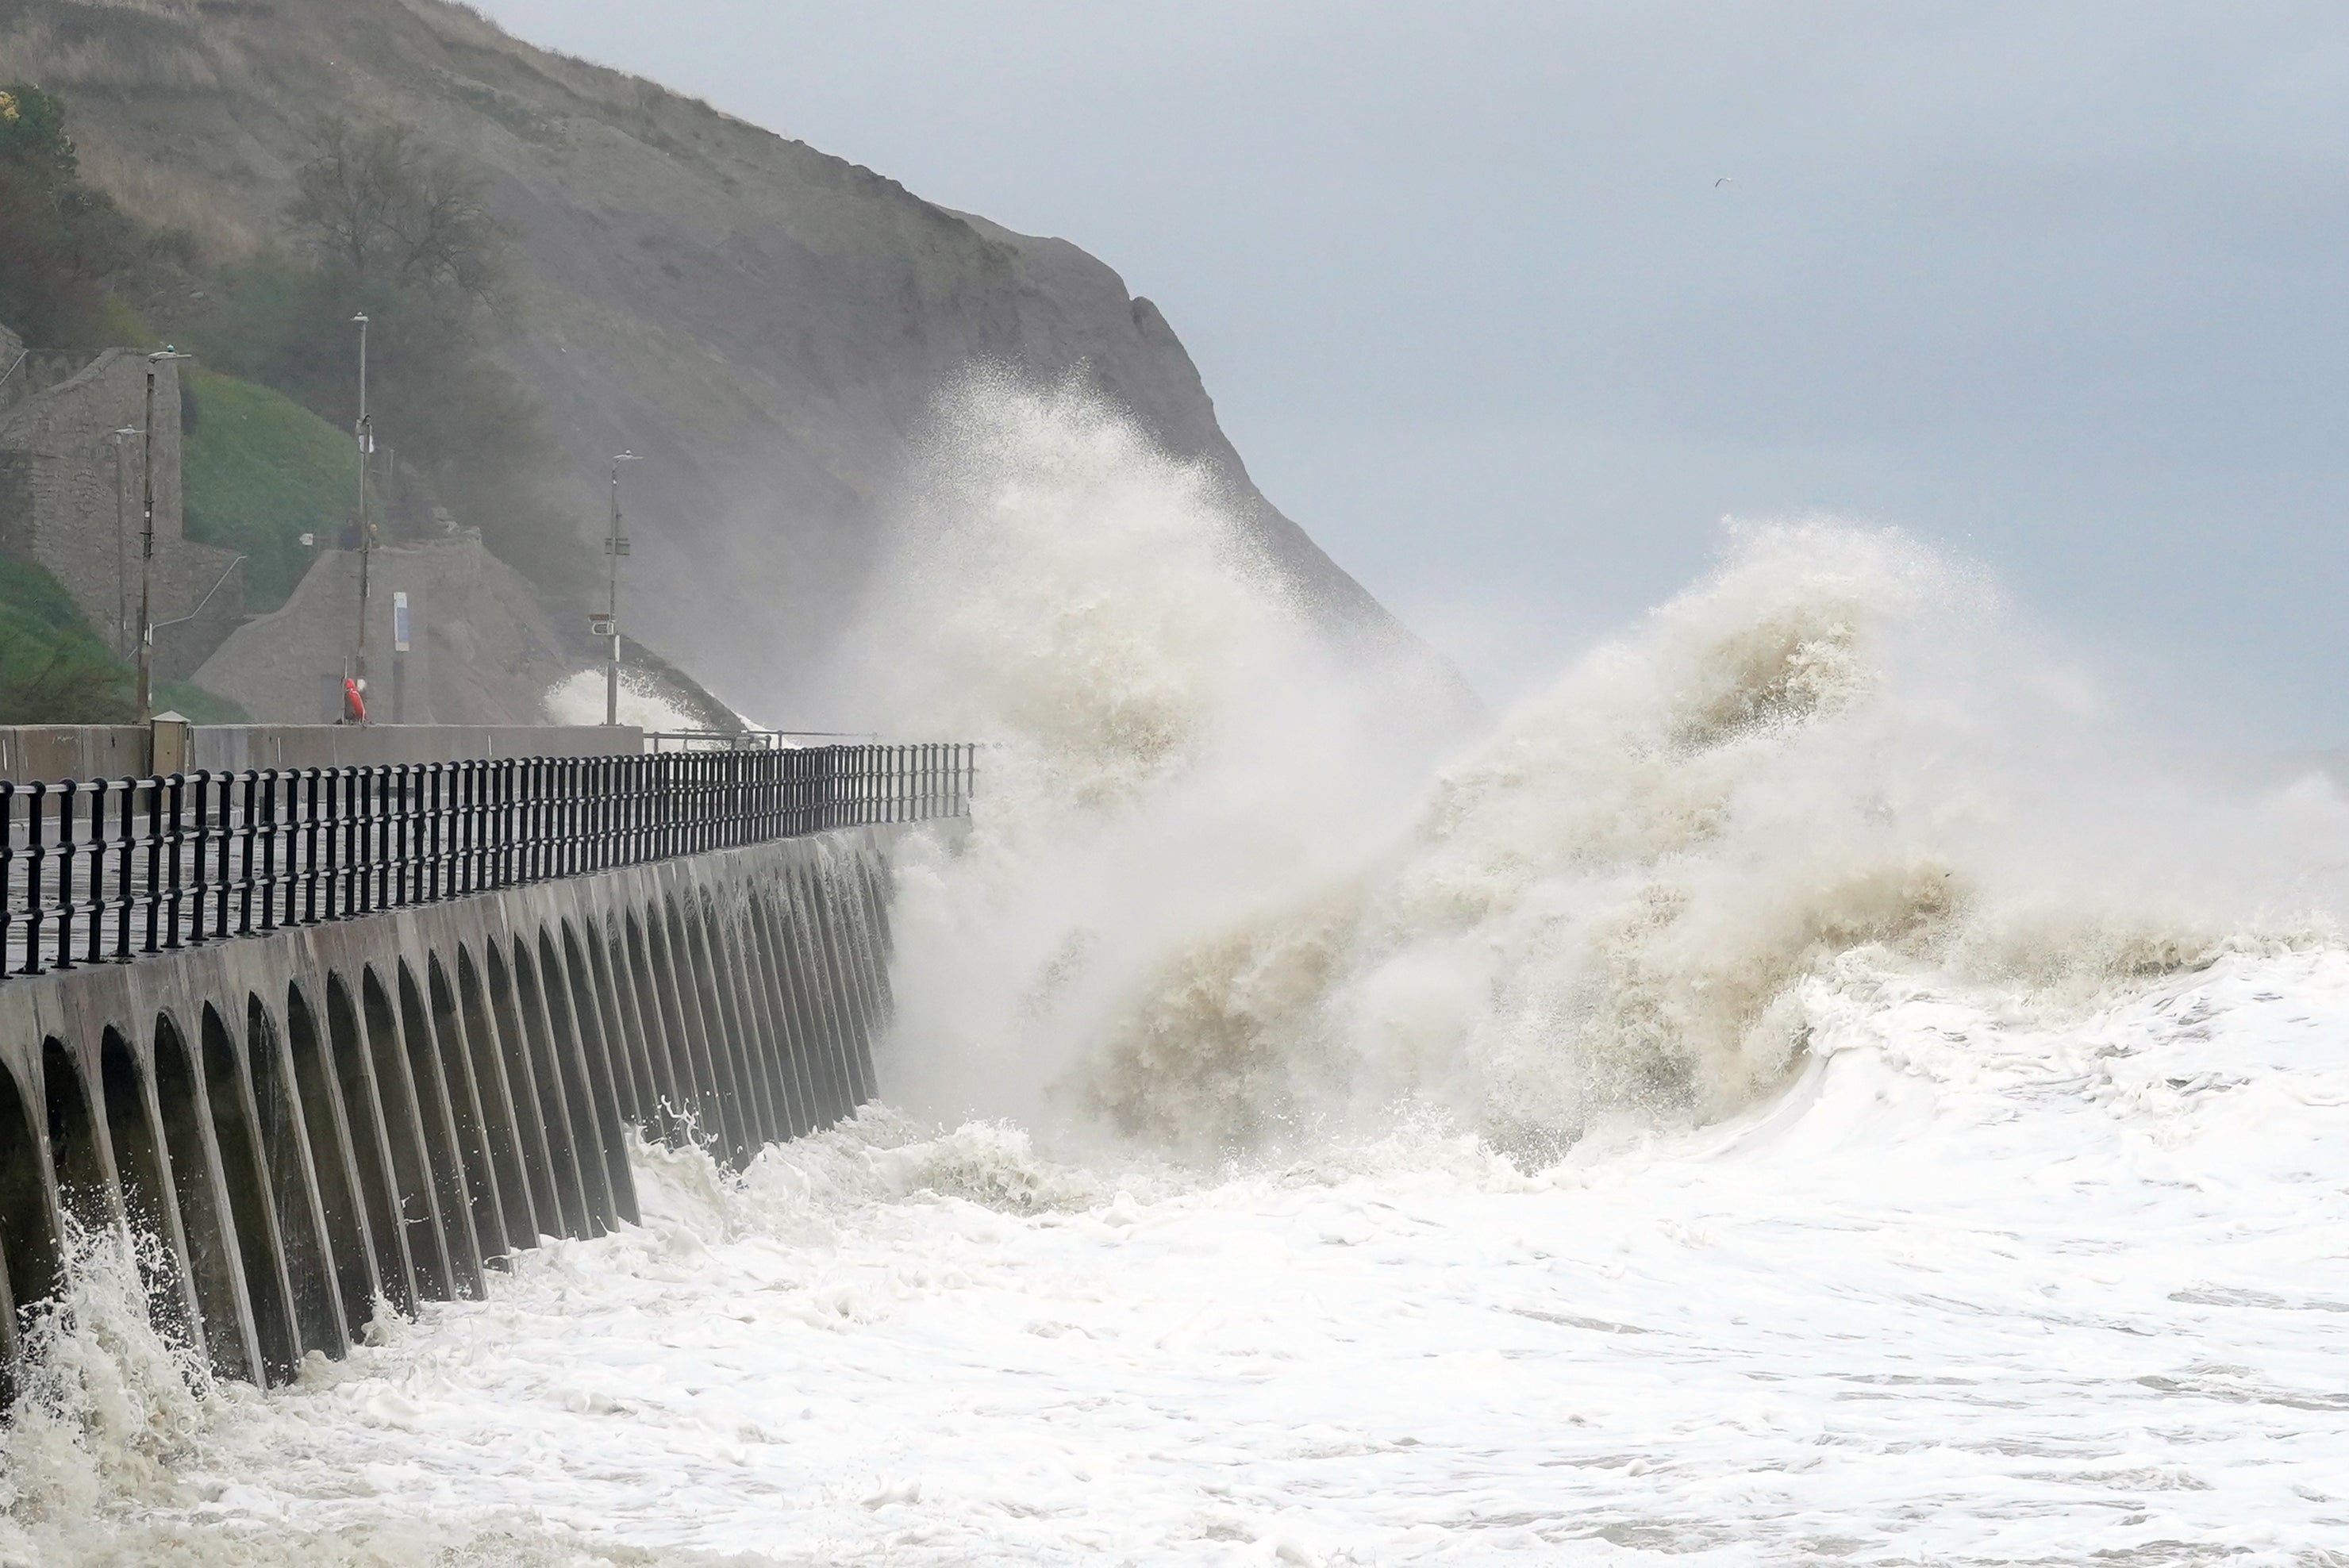 Waves crash over the promenade in Folkestone, Kent, as Storm Ciaran brings high winds and heavy rain along the south coast of England